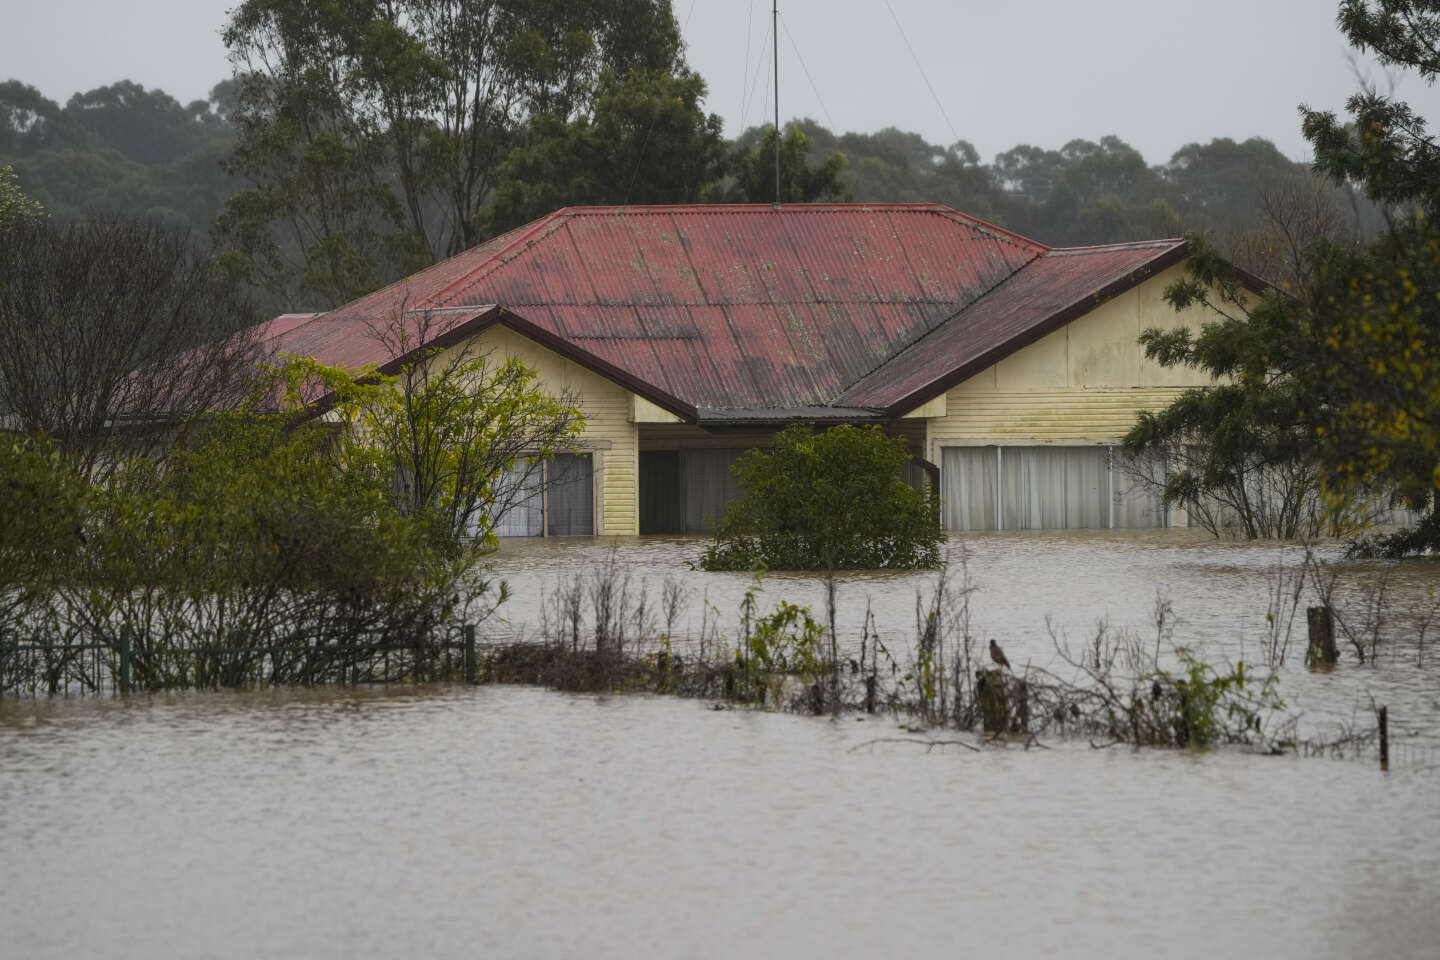 Tens of thousands of people have been forced from their homes by Sydney floods